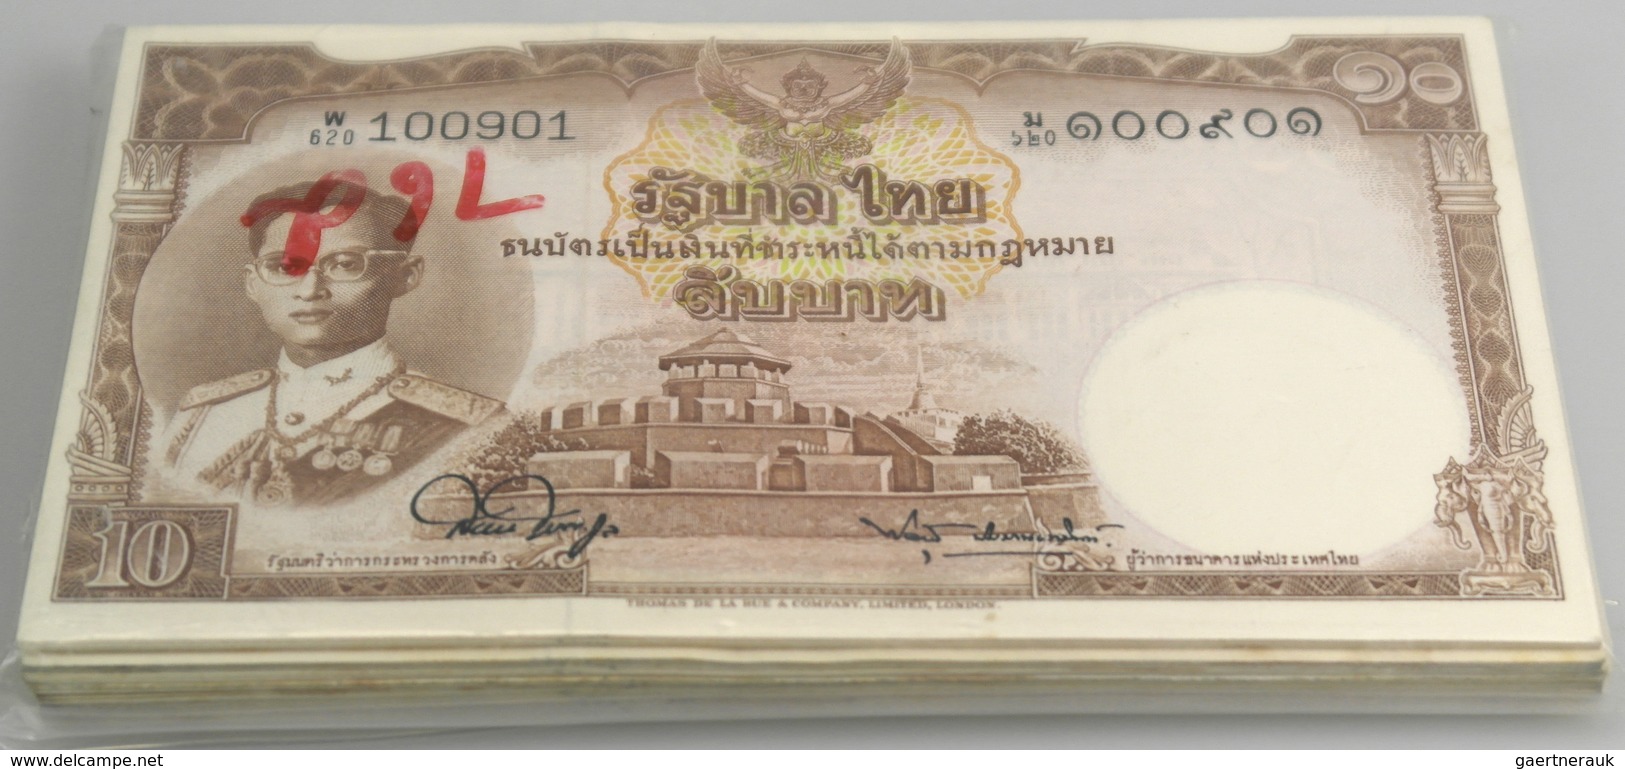 Thailand: Bundle Of 100 Banknotes 10 Baht ND P. 76 In Condition: AUNC To UNC. (100 Pcs) - Thailand